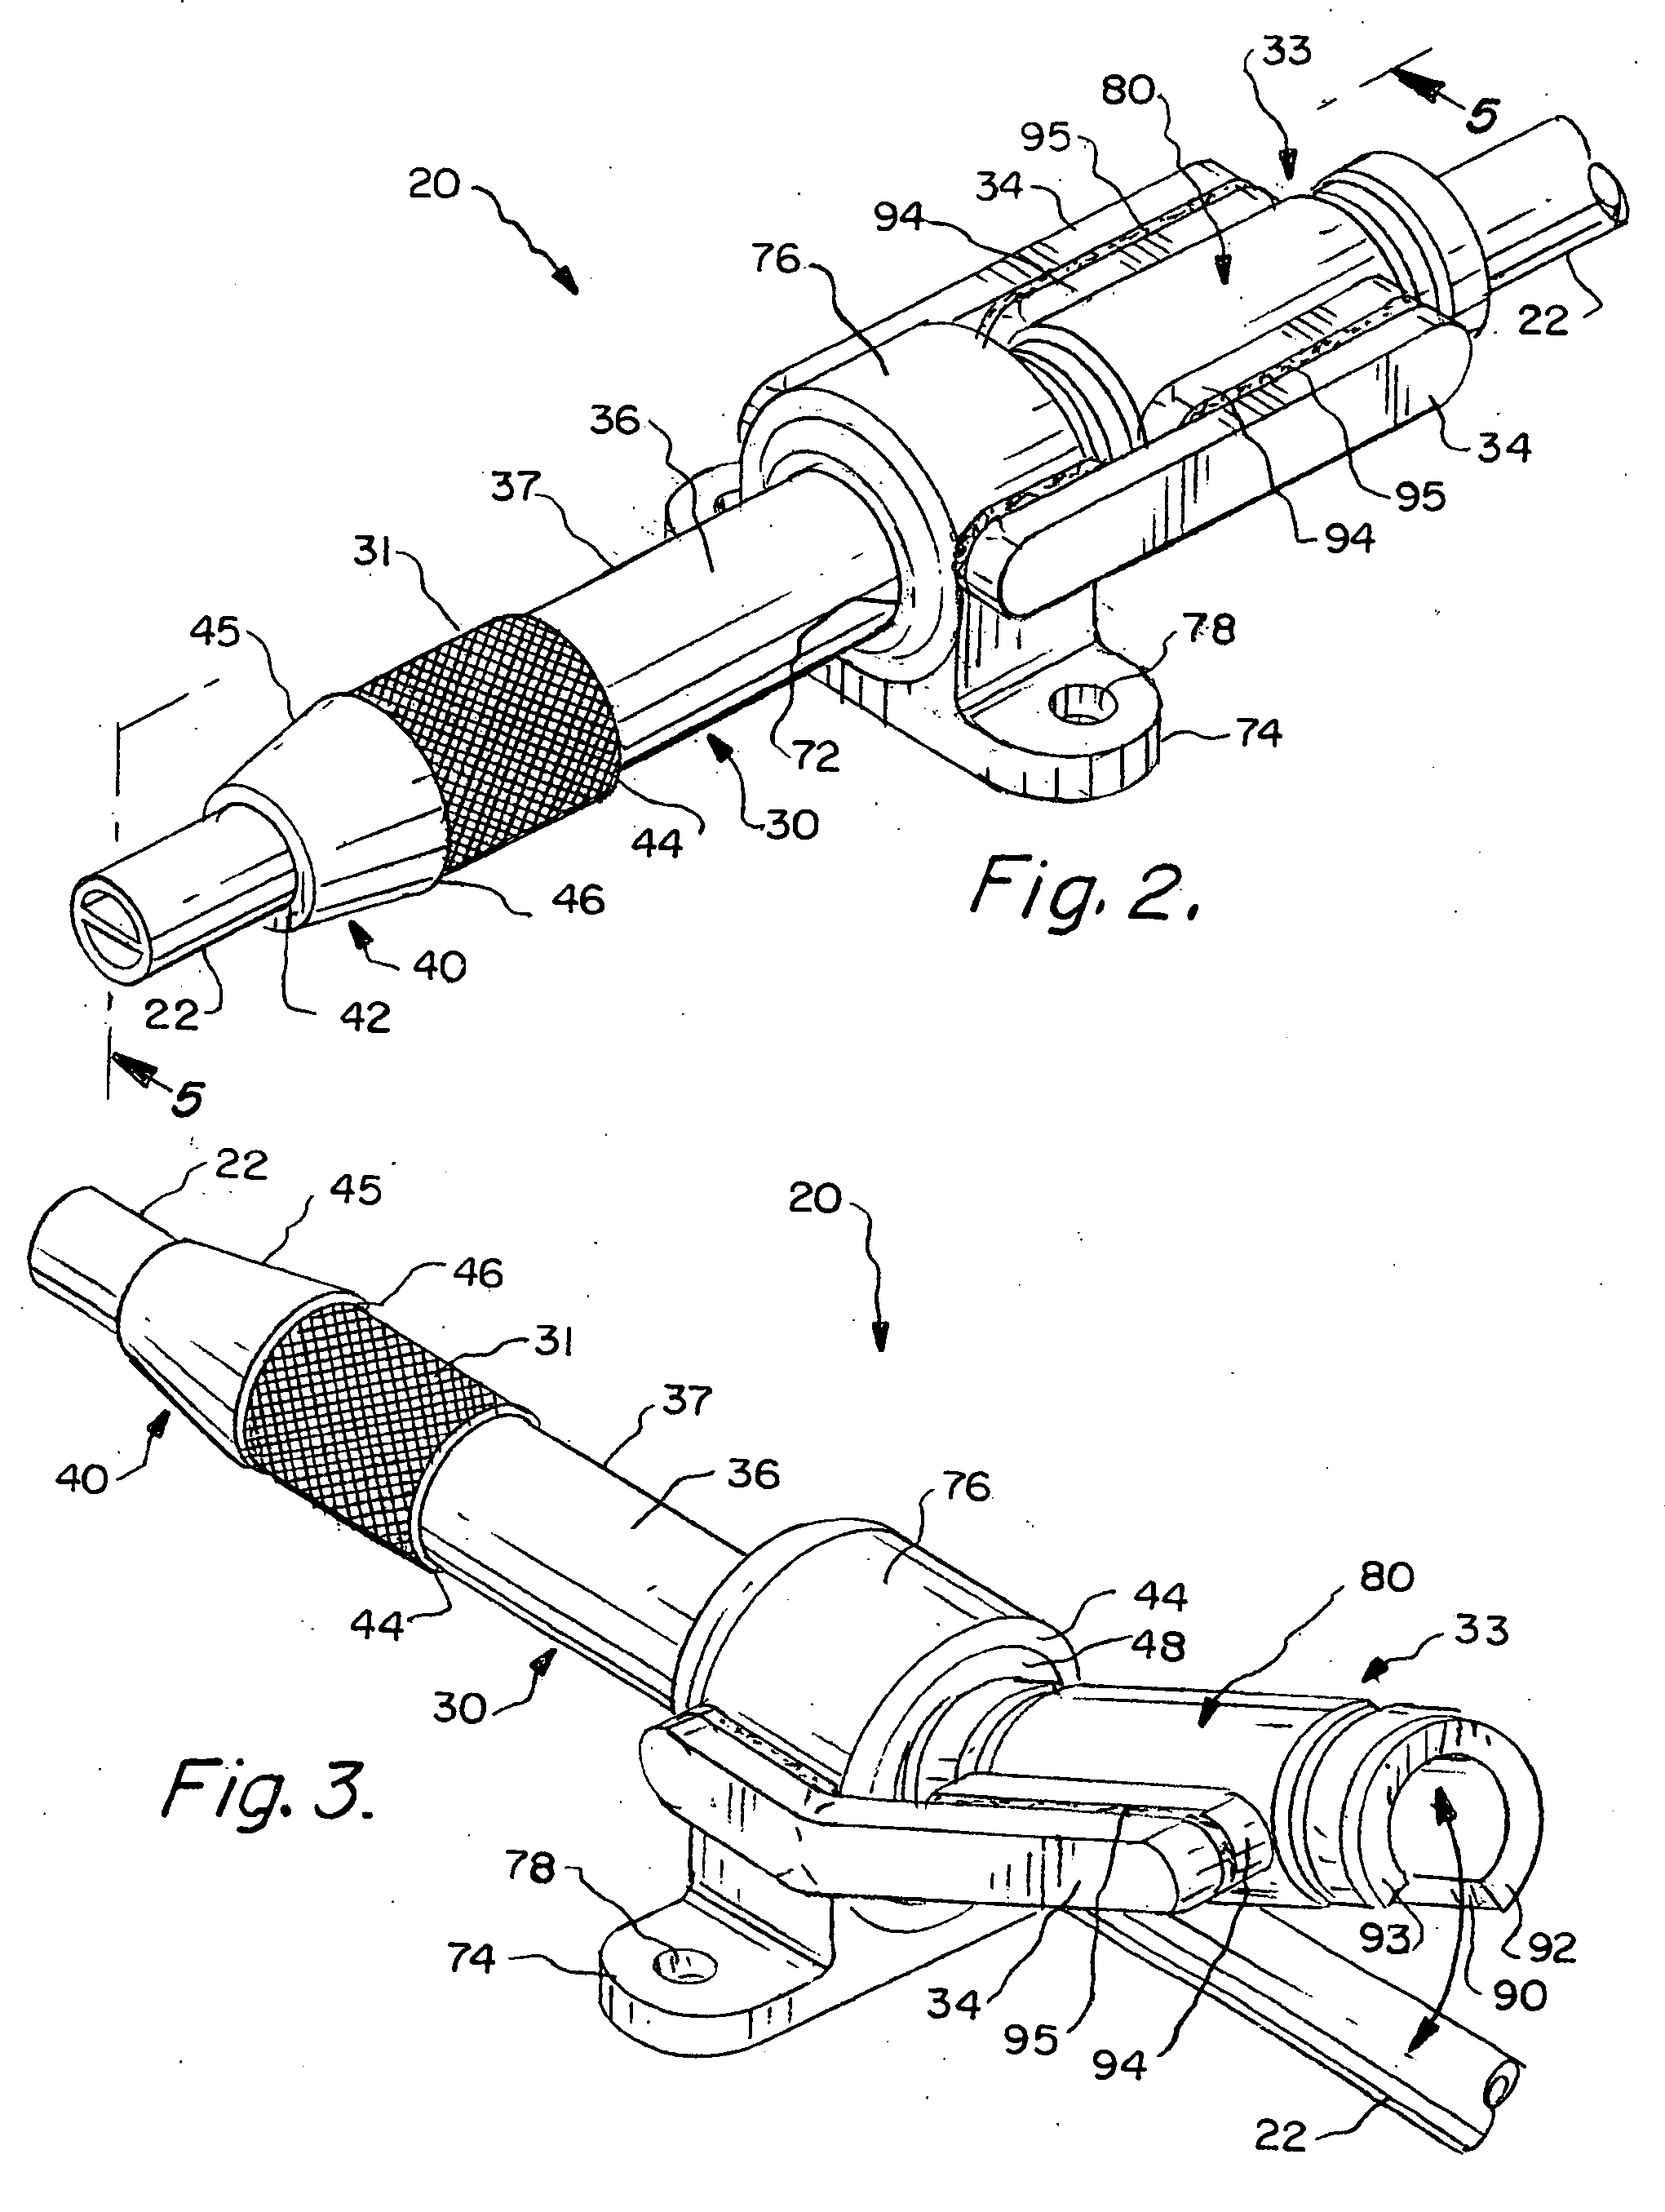 Enhanced apparatus for percutaneous catheter implantation and replacement